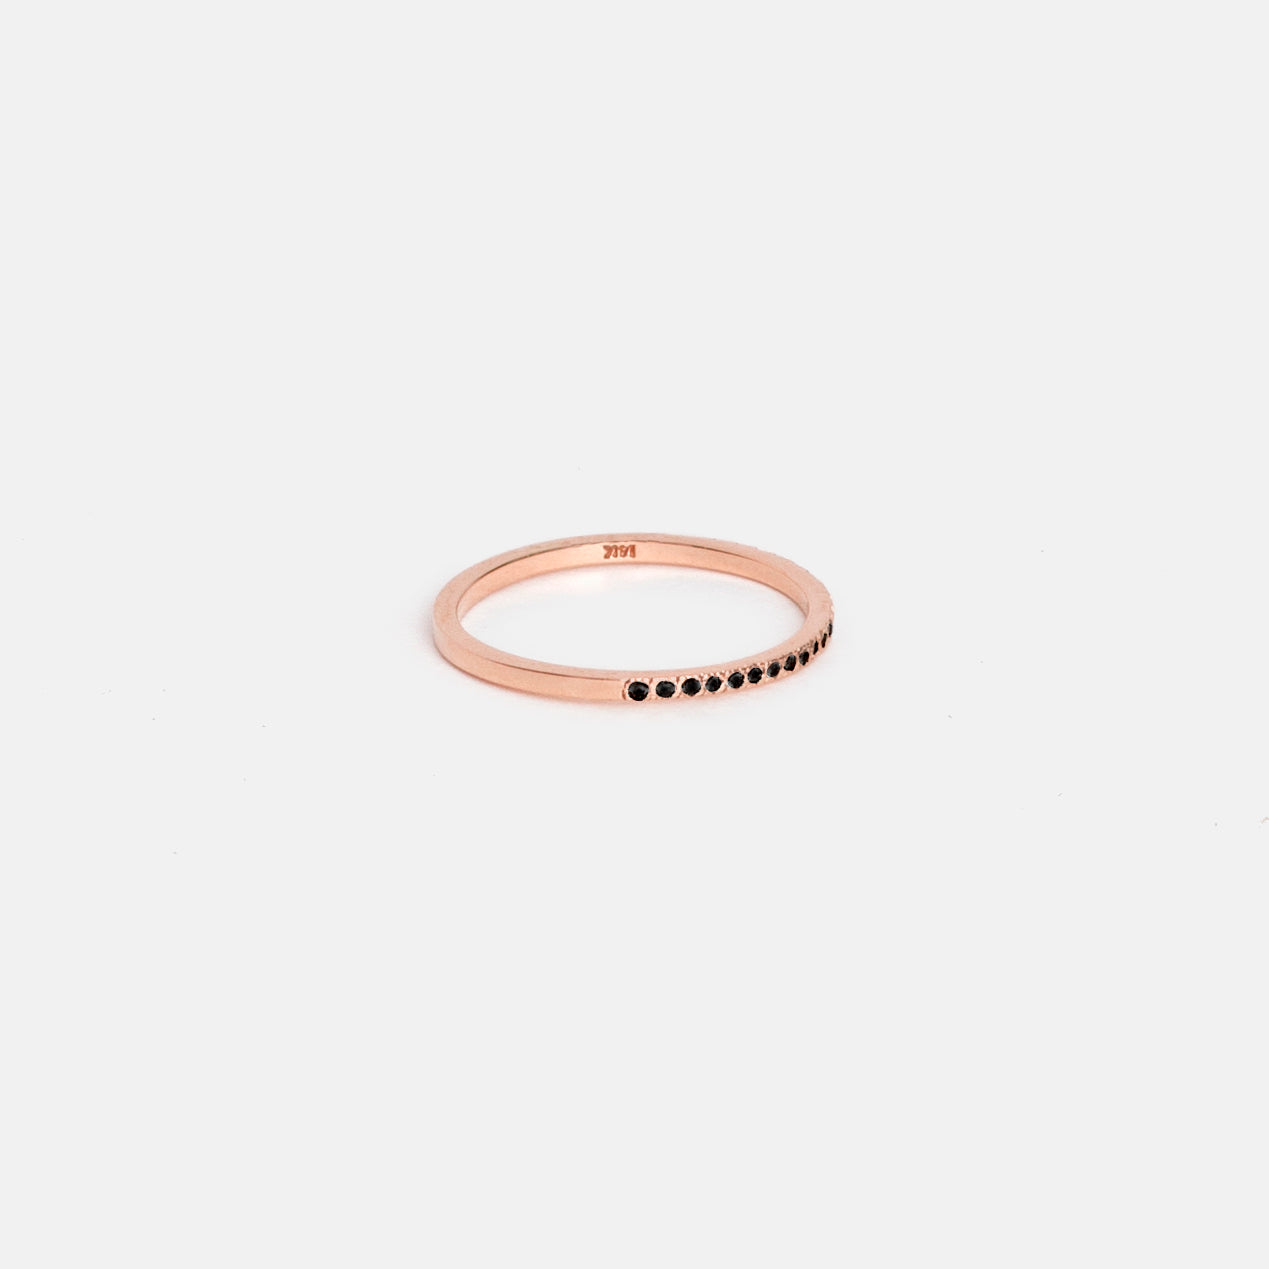 Eile Alternative Ring in 14k Rose Gold set with Black Diamonds By SHW Fine Jewelry NYC